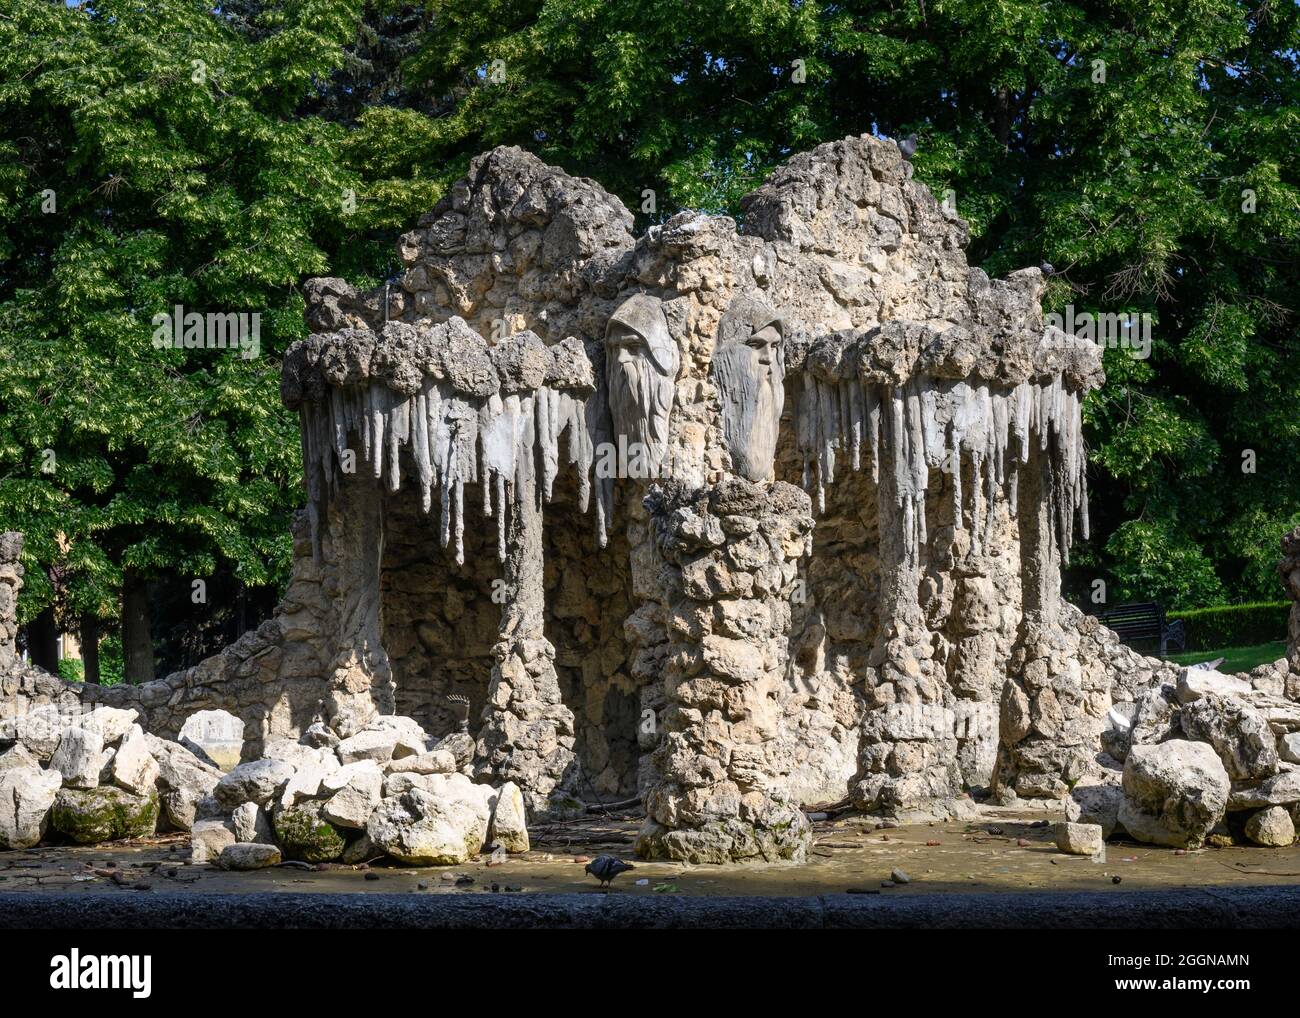 Sculpture composition 'Gnomes' on the fountain in Pyatigorsk, Russia Stock Photo